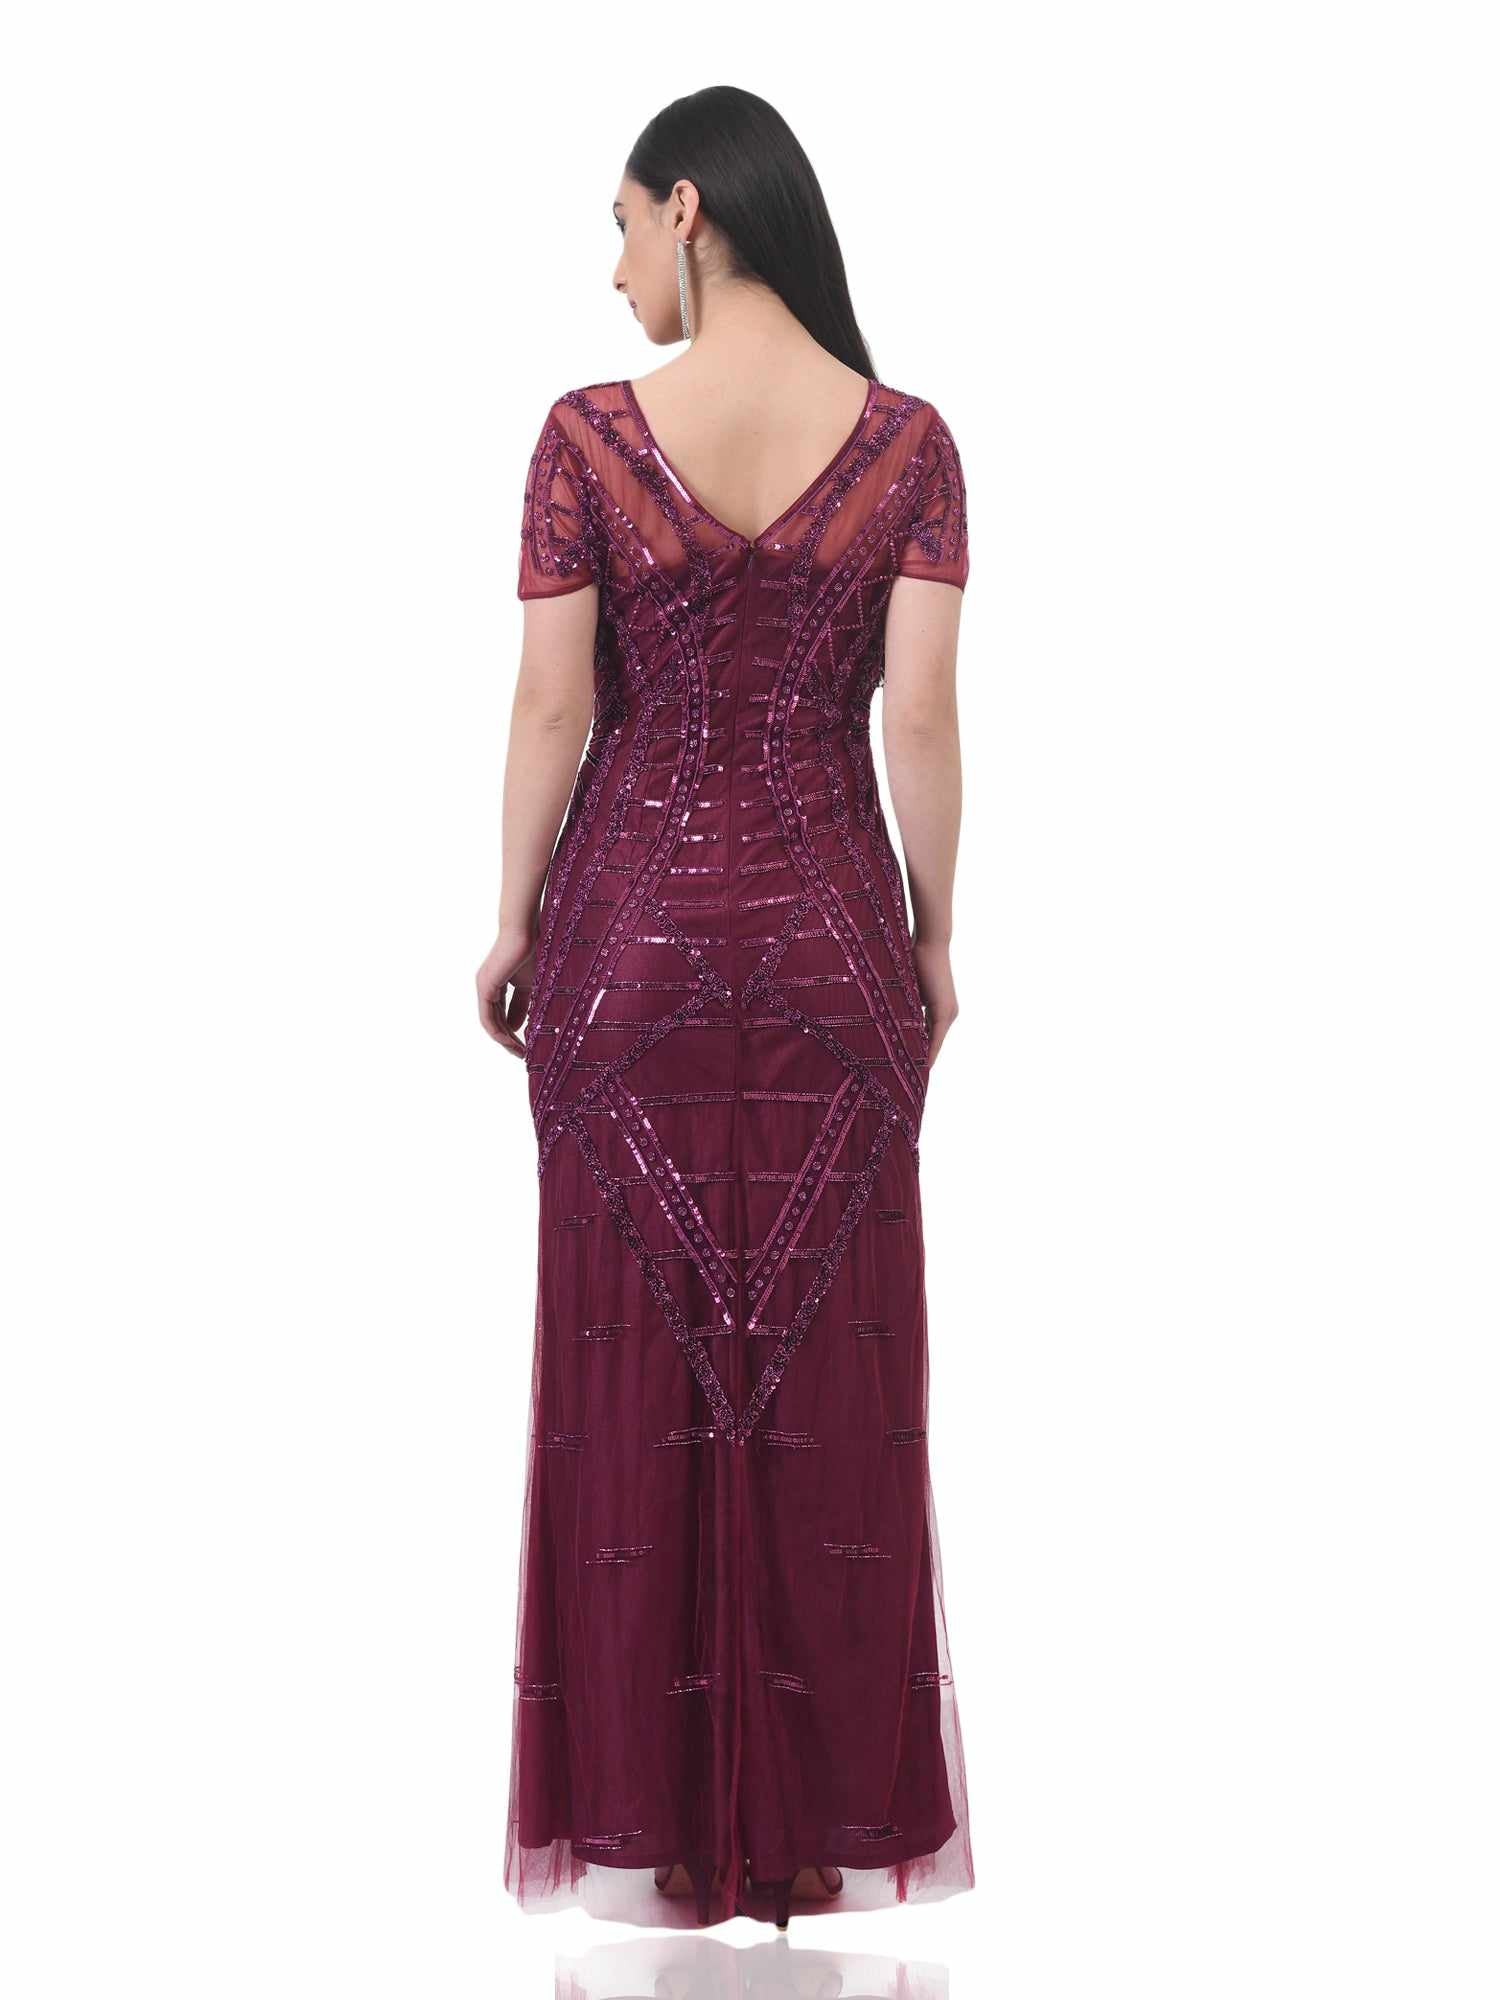 wine on wine embellished gown